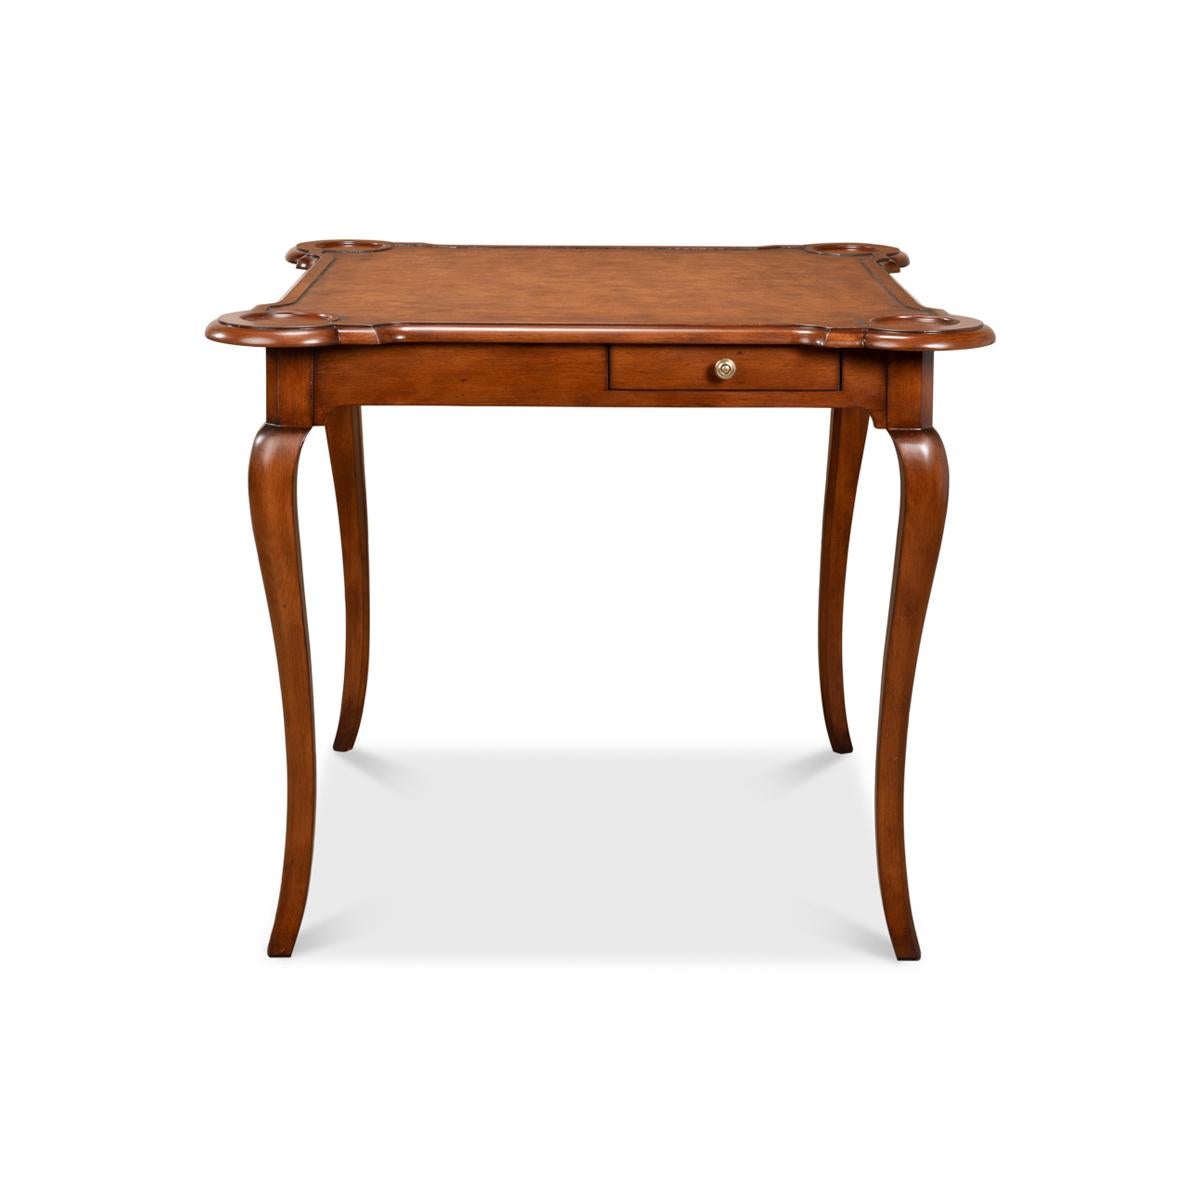 Introducing the English leather top game table, a stunning piece of 18th-century inspired craftsmanship. The table boasts a rich walnut finish that exudes elegance and sophistication. The hand-colored and antiqued leather inset top adds a touch of